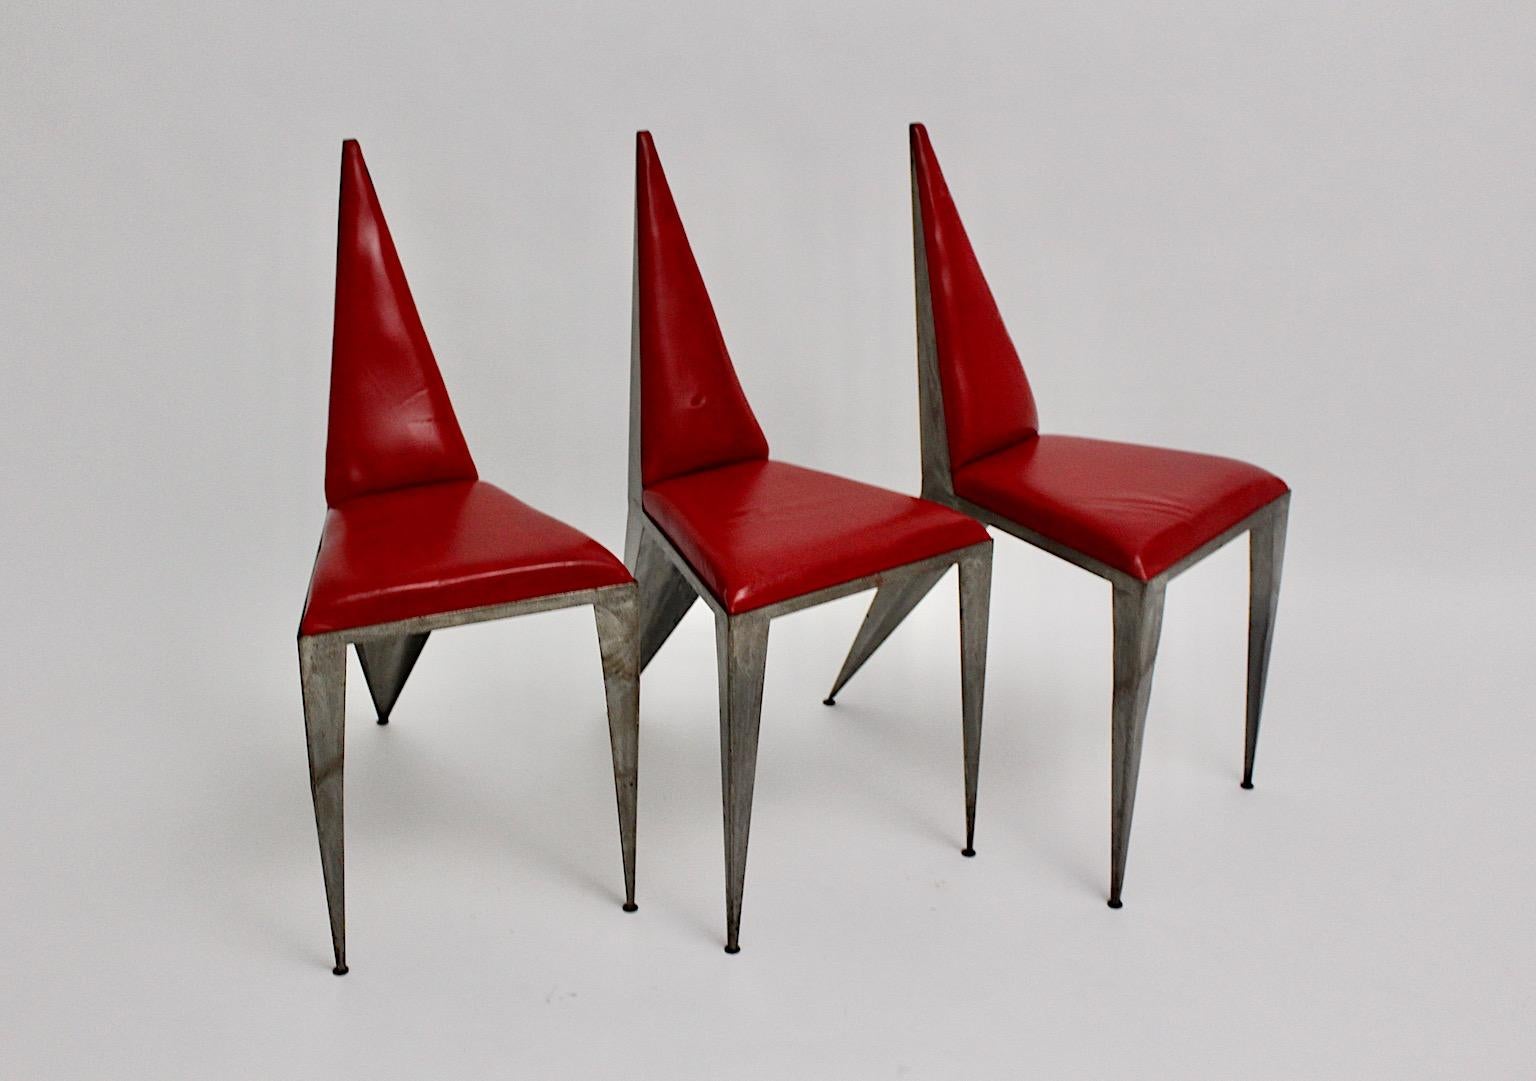 Red Leather Iron Vintage Geometric Dining Chairs or Chairs Modern 1960s Austria In Fair Condition For Sale In Vienna, AT